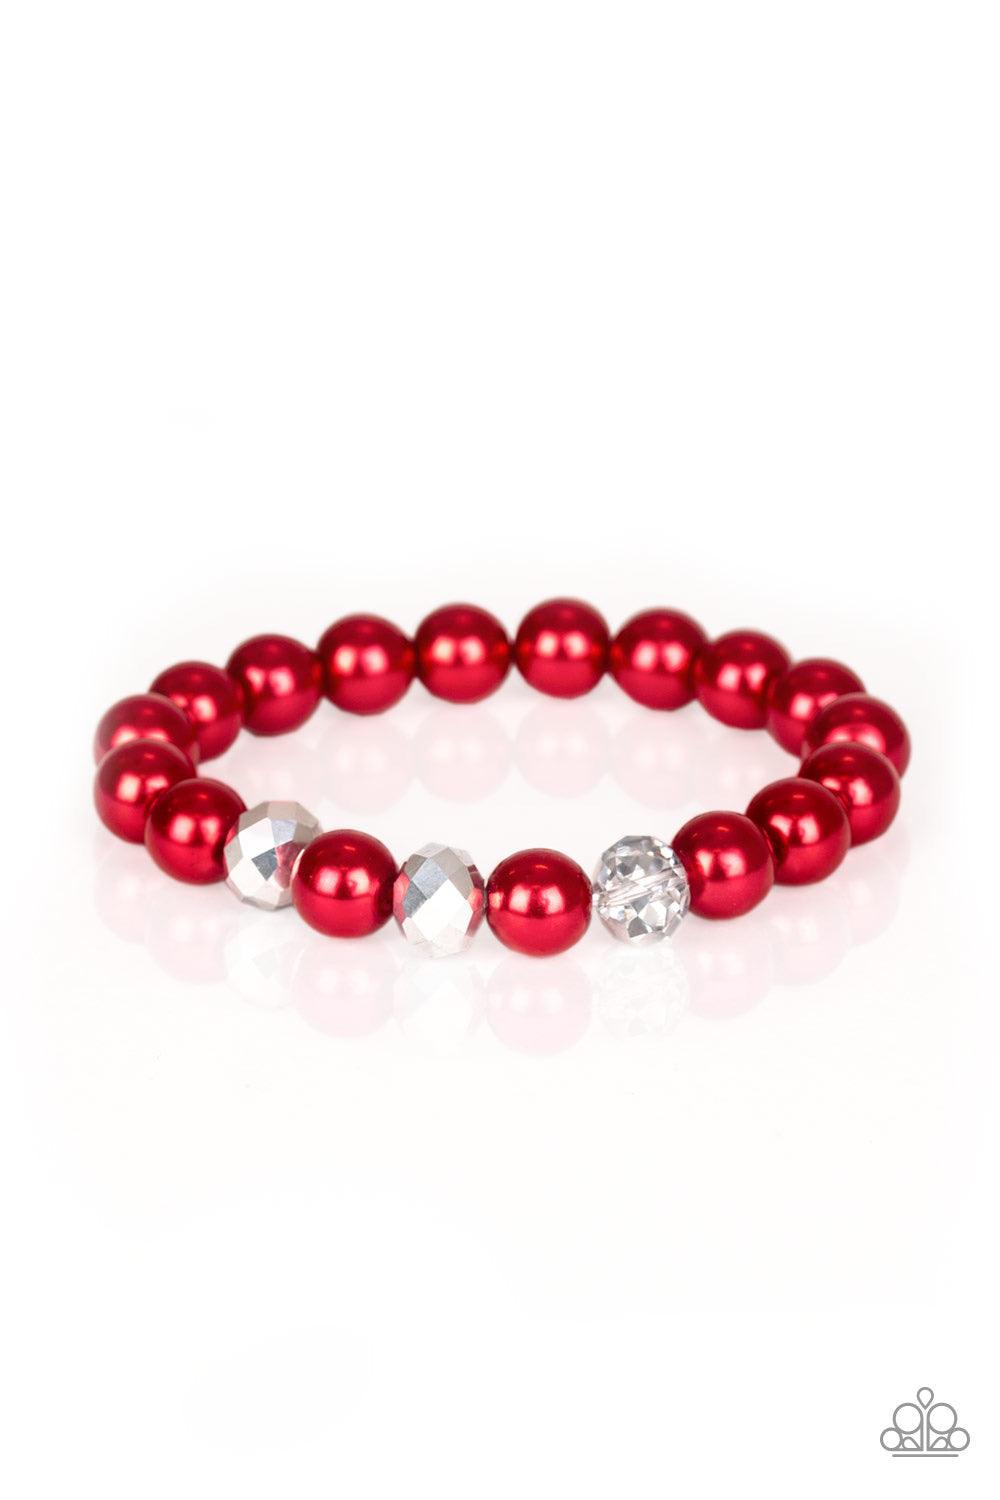 Paparazzi Accessories Really Resplendent - Red Infused with three metallic crystal-like beads, a refined collection of red pearls is threaded along a stretchy band around the wrist in a timeless fashion. Jewelry